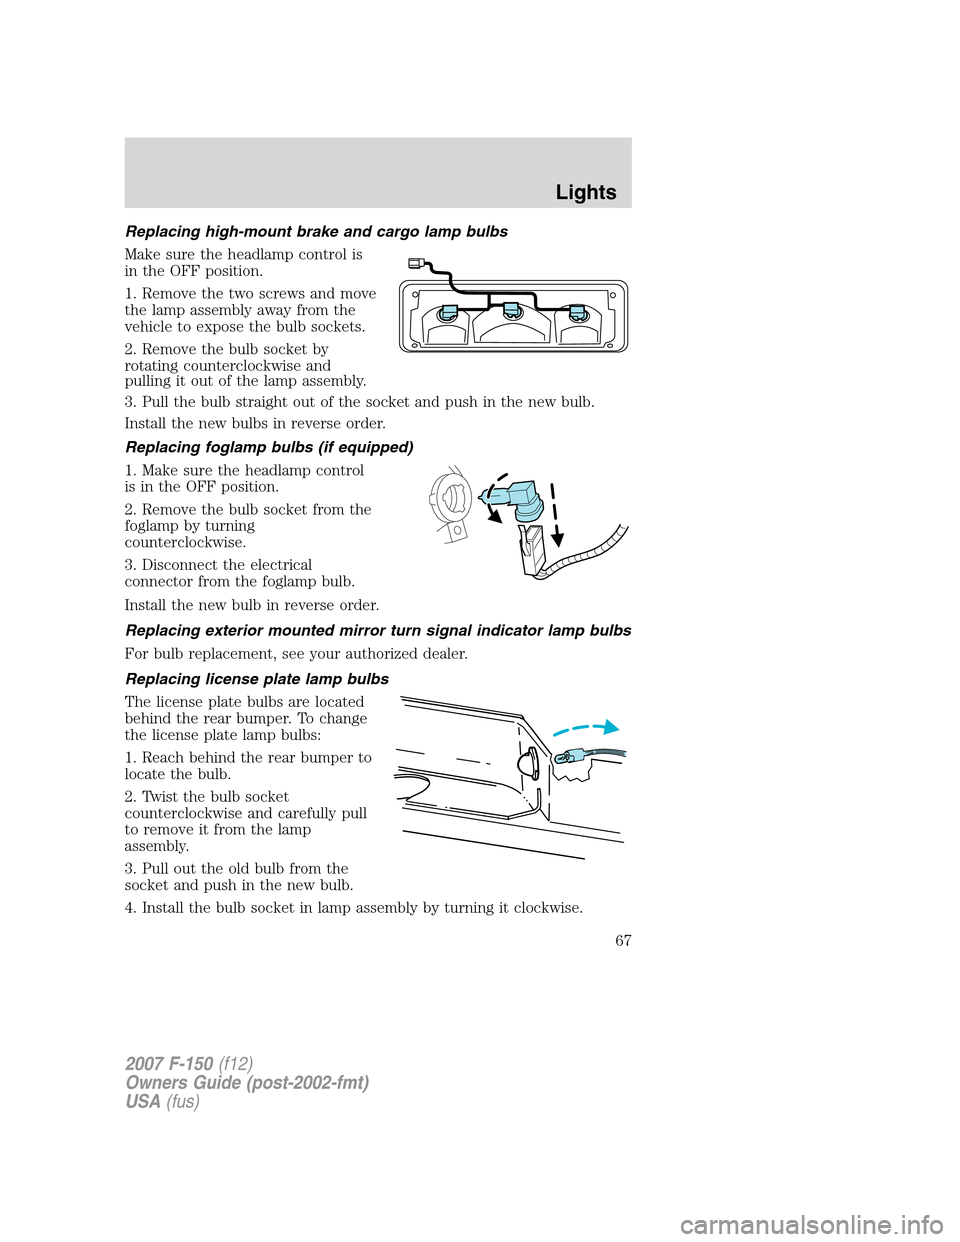 FORD F150 2007 11.G Owners Manual Replacing high-mount brake and cargo lamp bulbs
Make sure the headlamp control is
in the OFF position.
1. Remove the two screws and move
the lamp assembly away from the
vehicle to expose the bulb sock